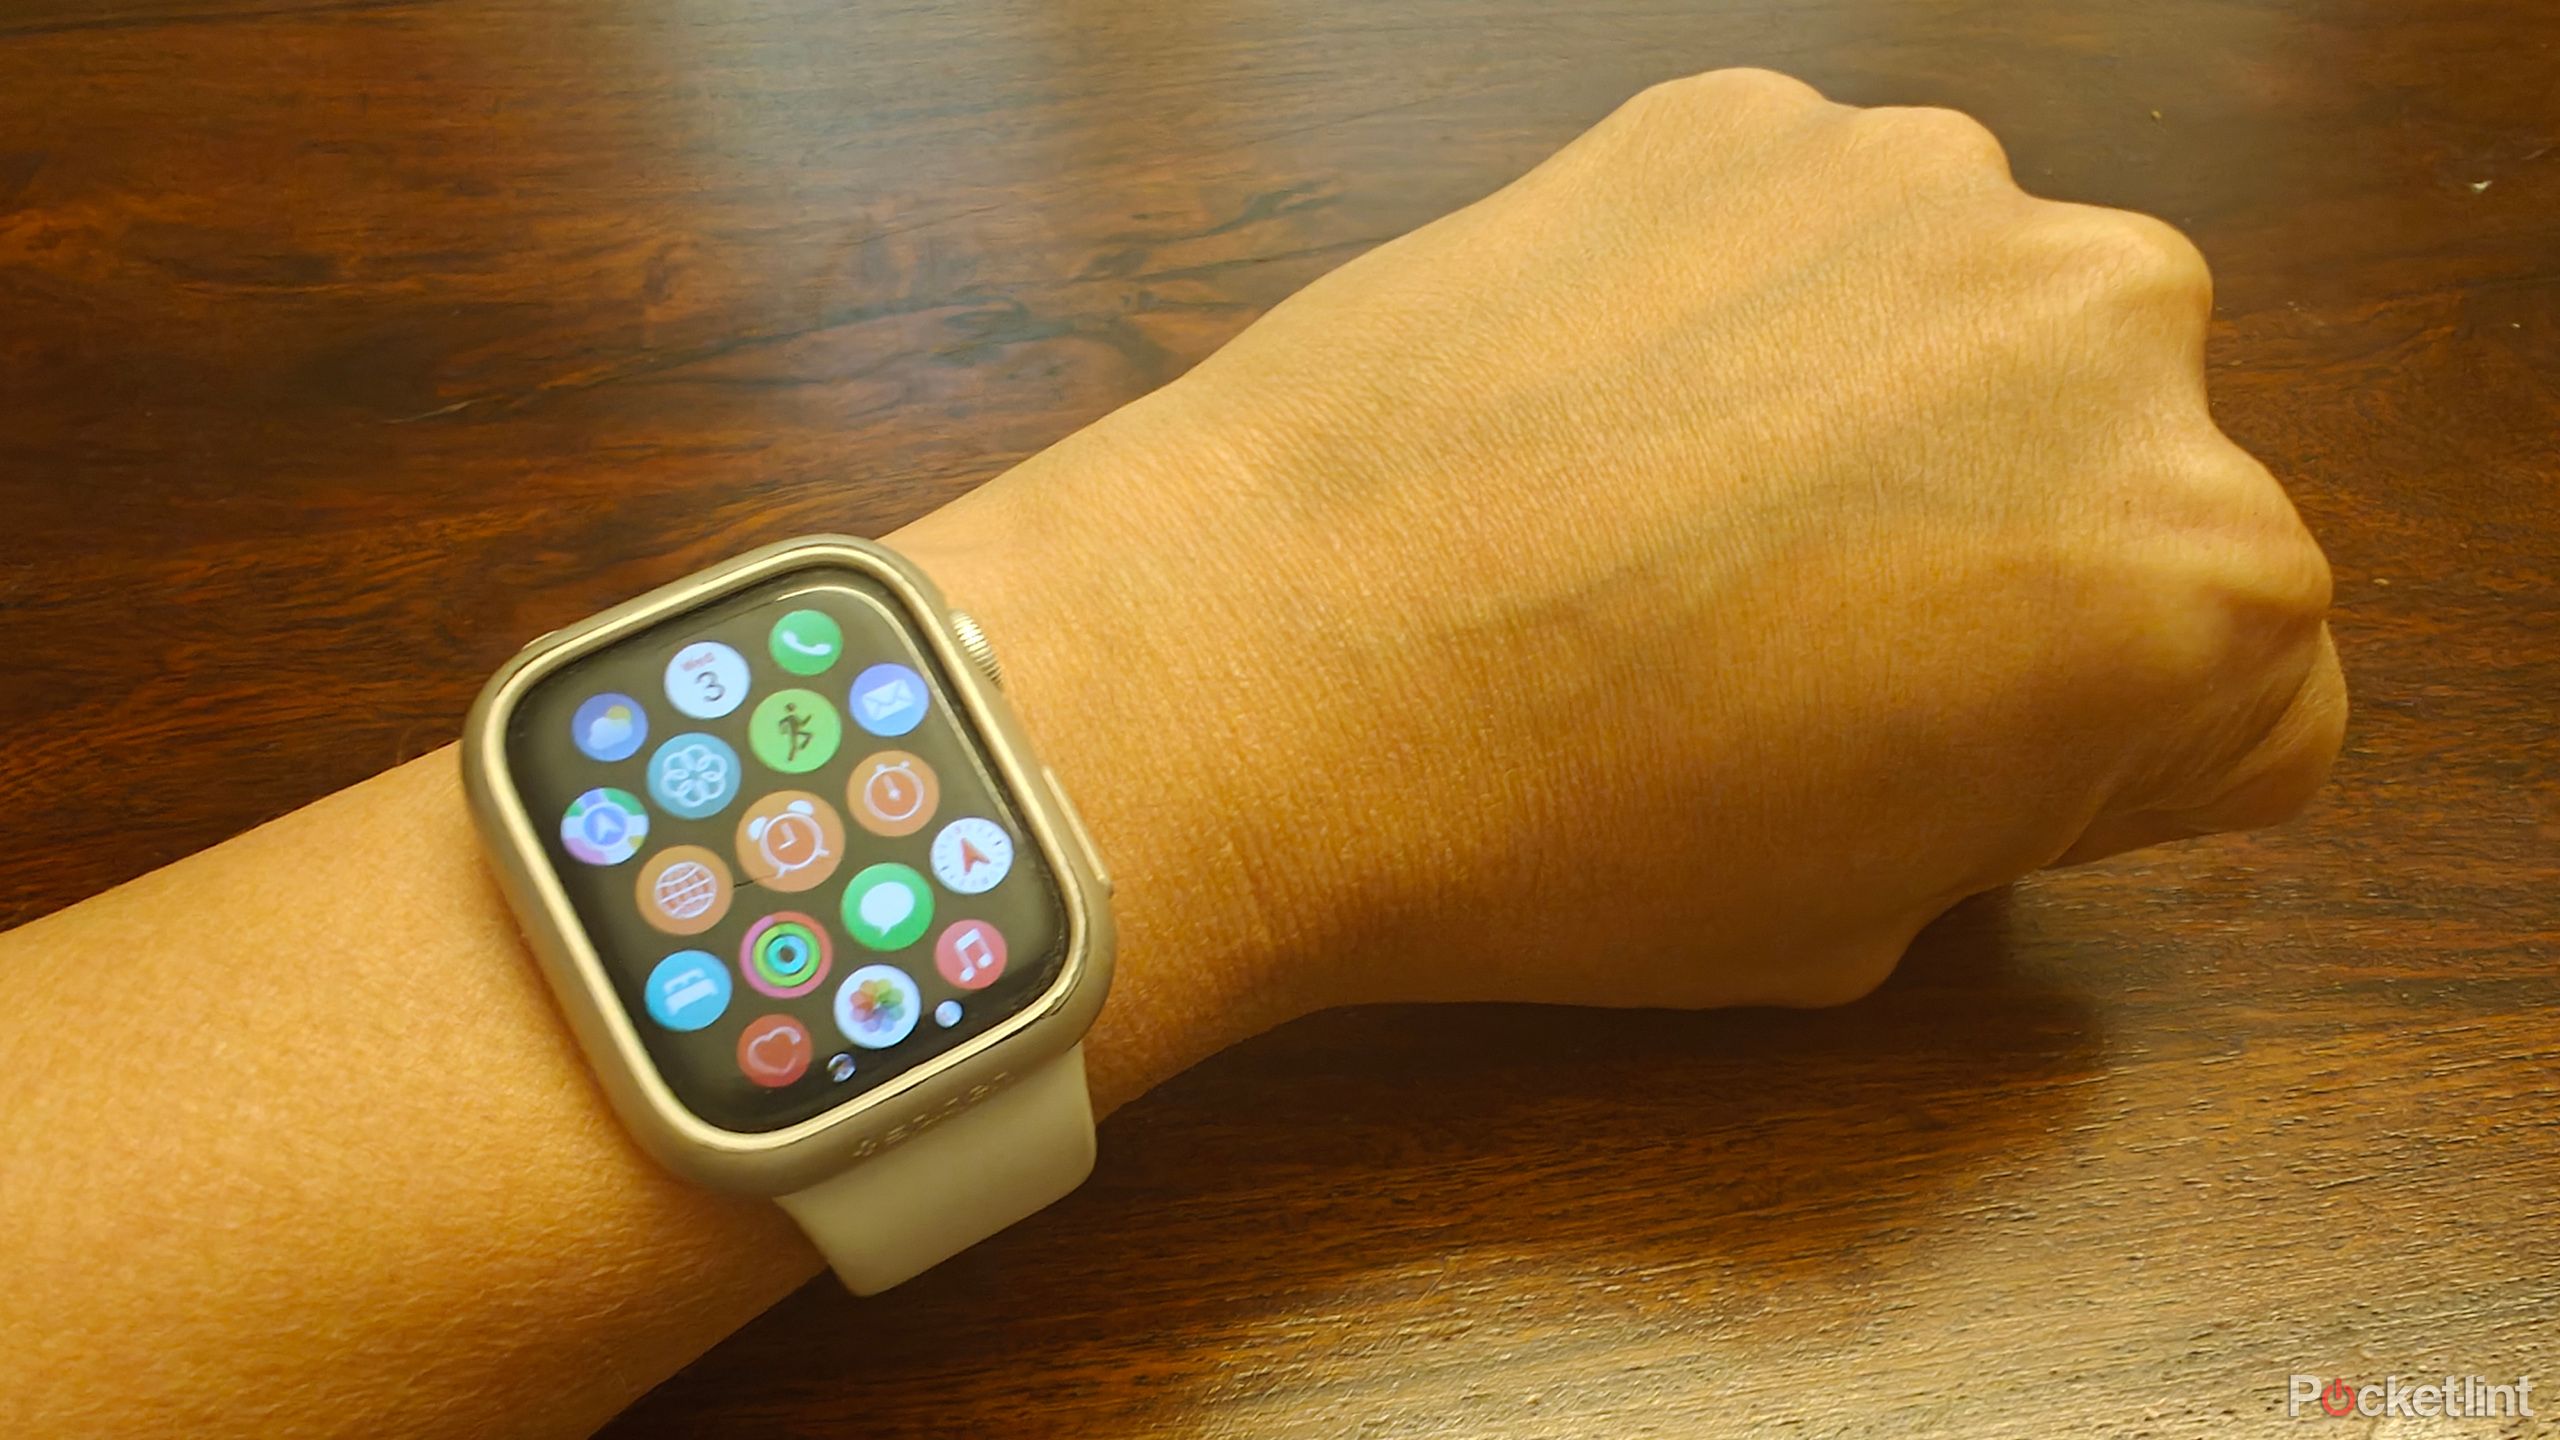 An Apple Watch showing app icons and a hand clenching a fist.